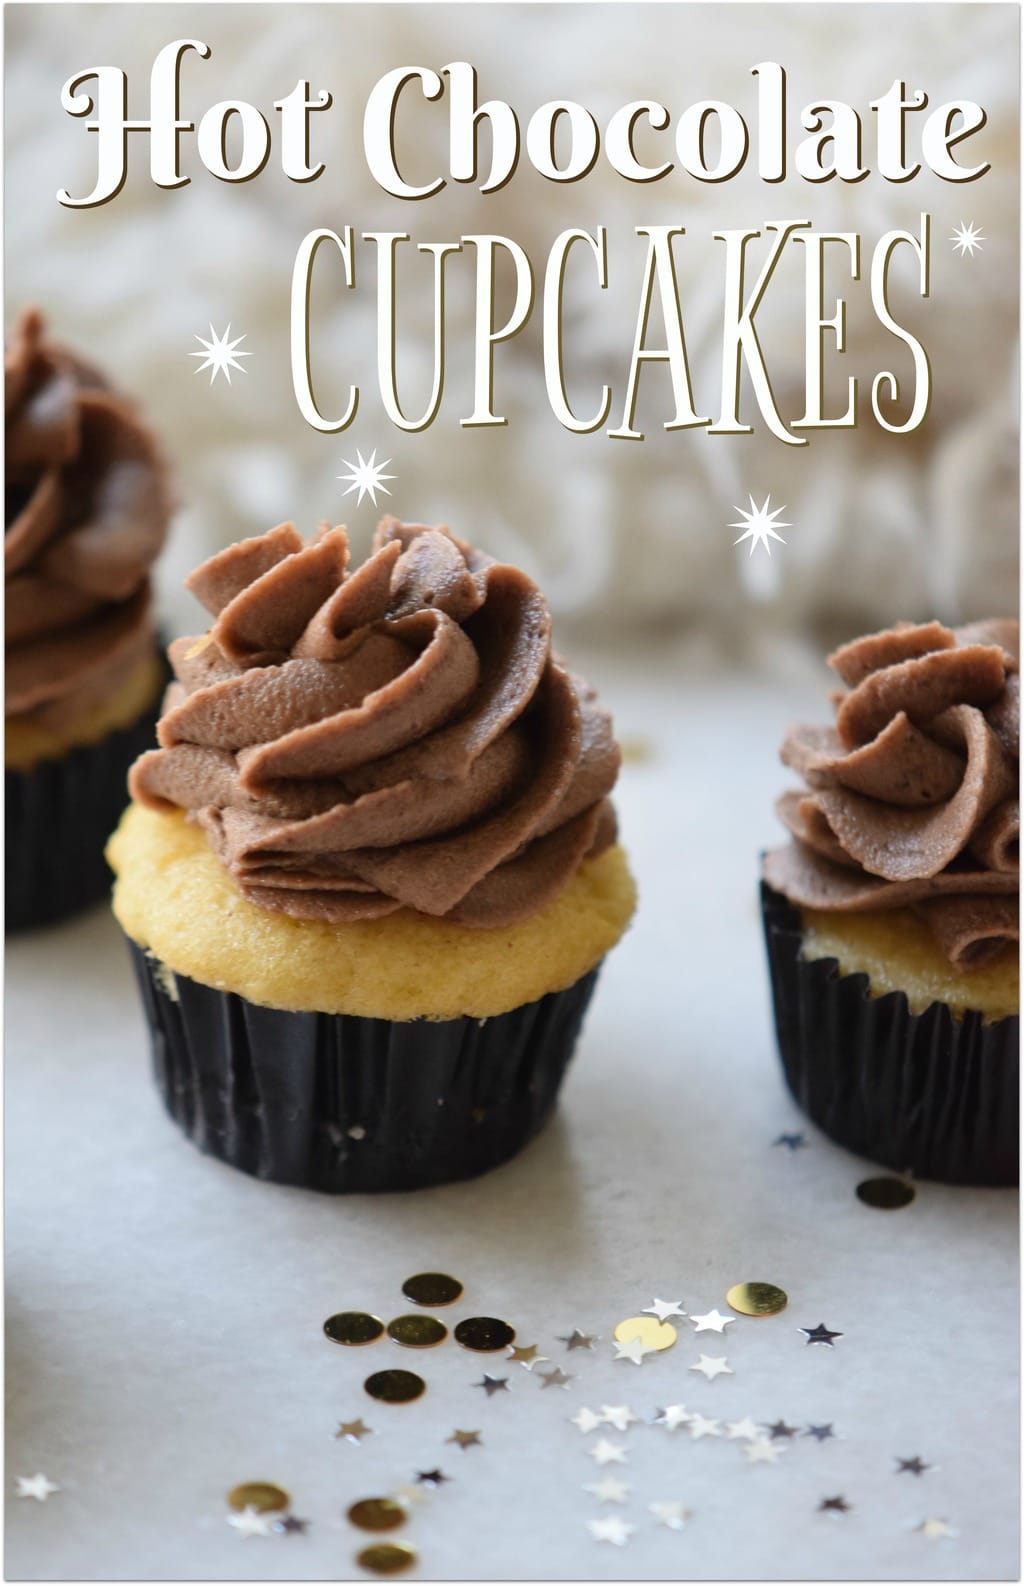 These hot chocolate cupcakes are absolutely to die for. What could be better than hot chocolate with a cupcake? Hot chocolate IN a cupcake! 